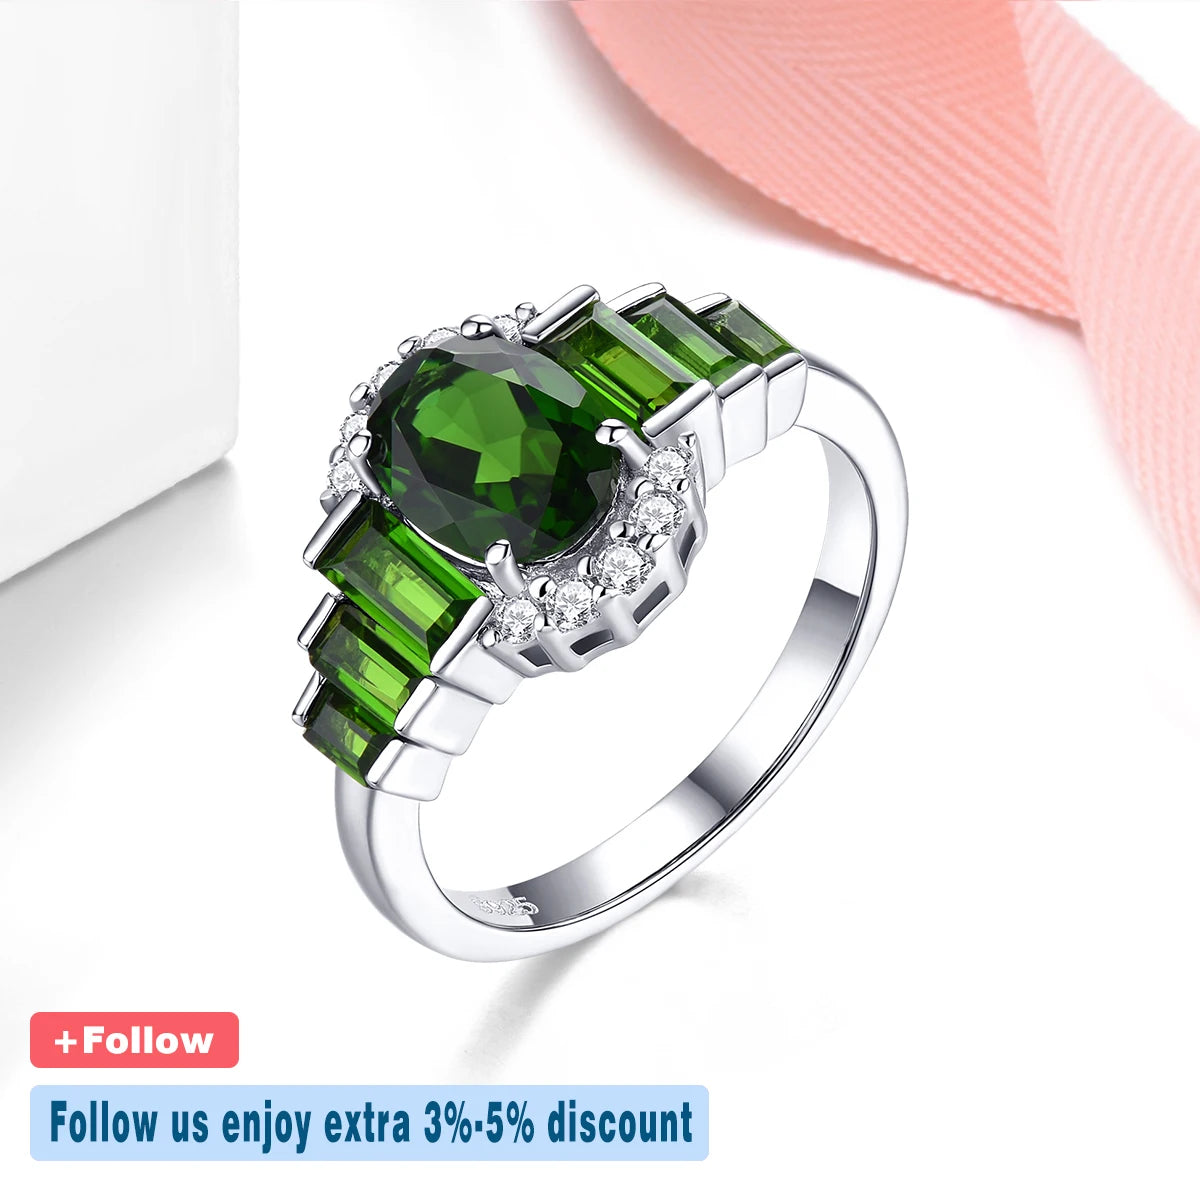 Natural Chrome Diopside Sterling Silver Rings 2.2 Carats Genuine Green Diopside Women Classic Elegant Style Christmas Gifts